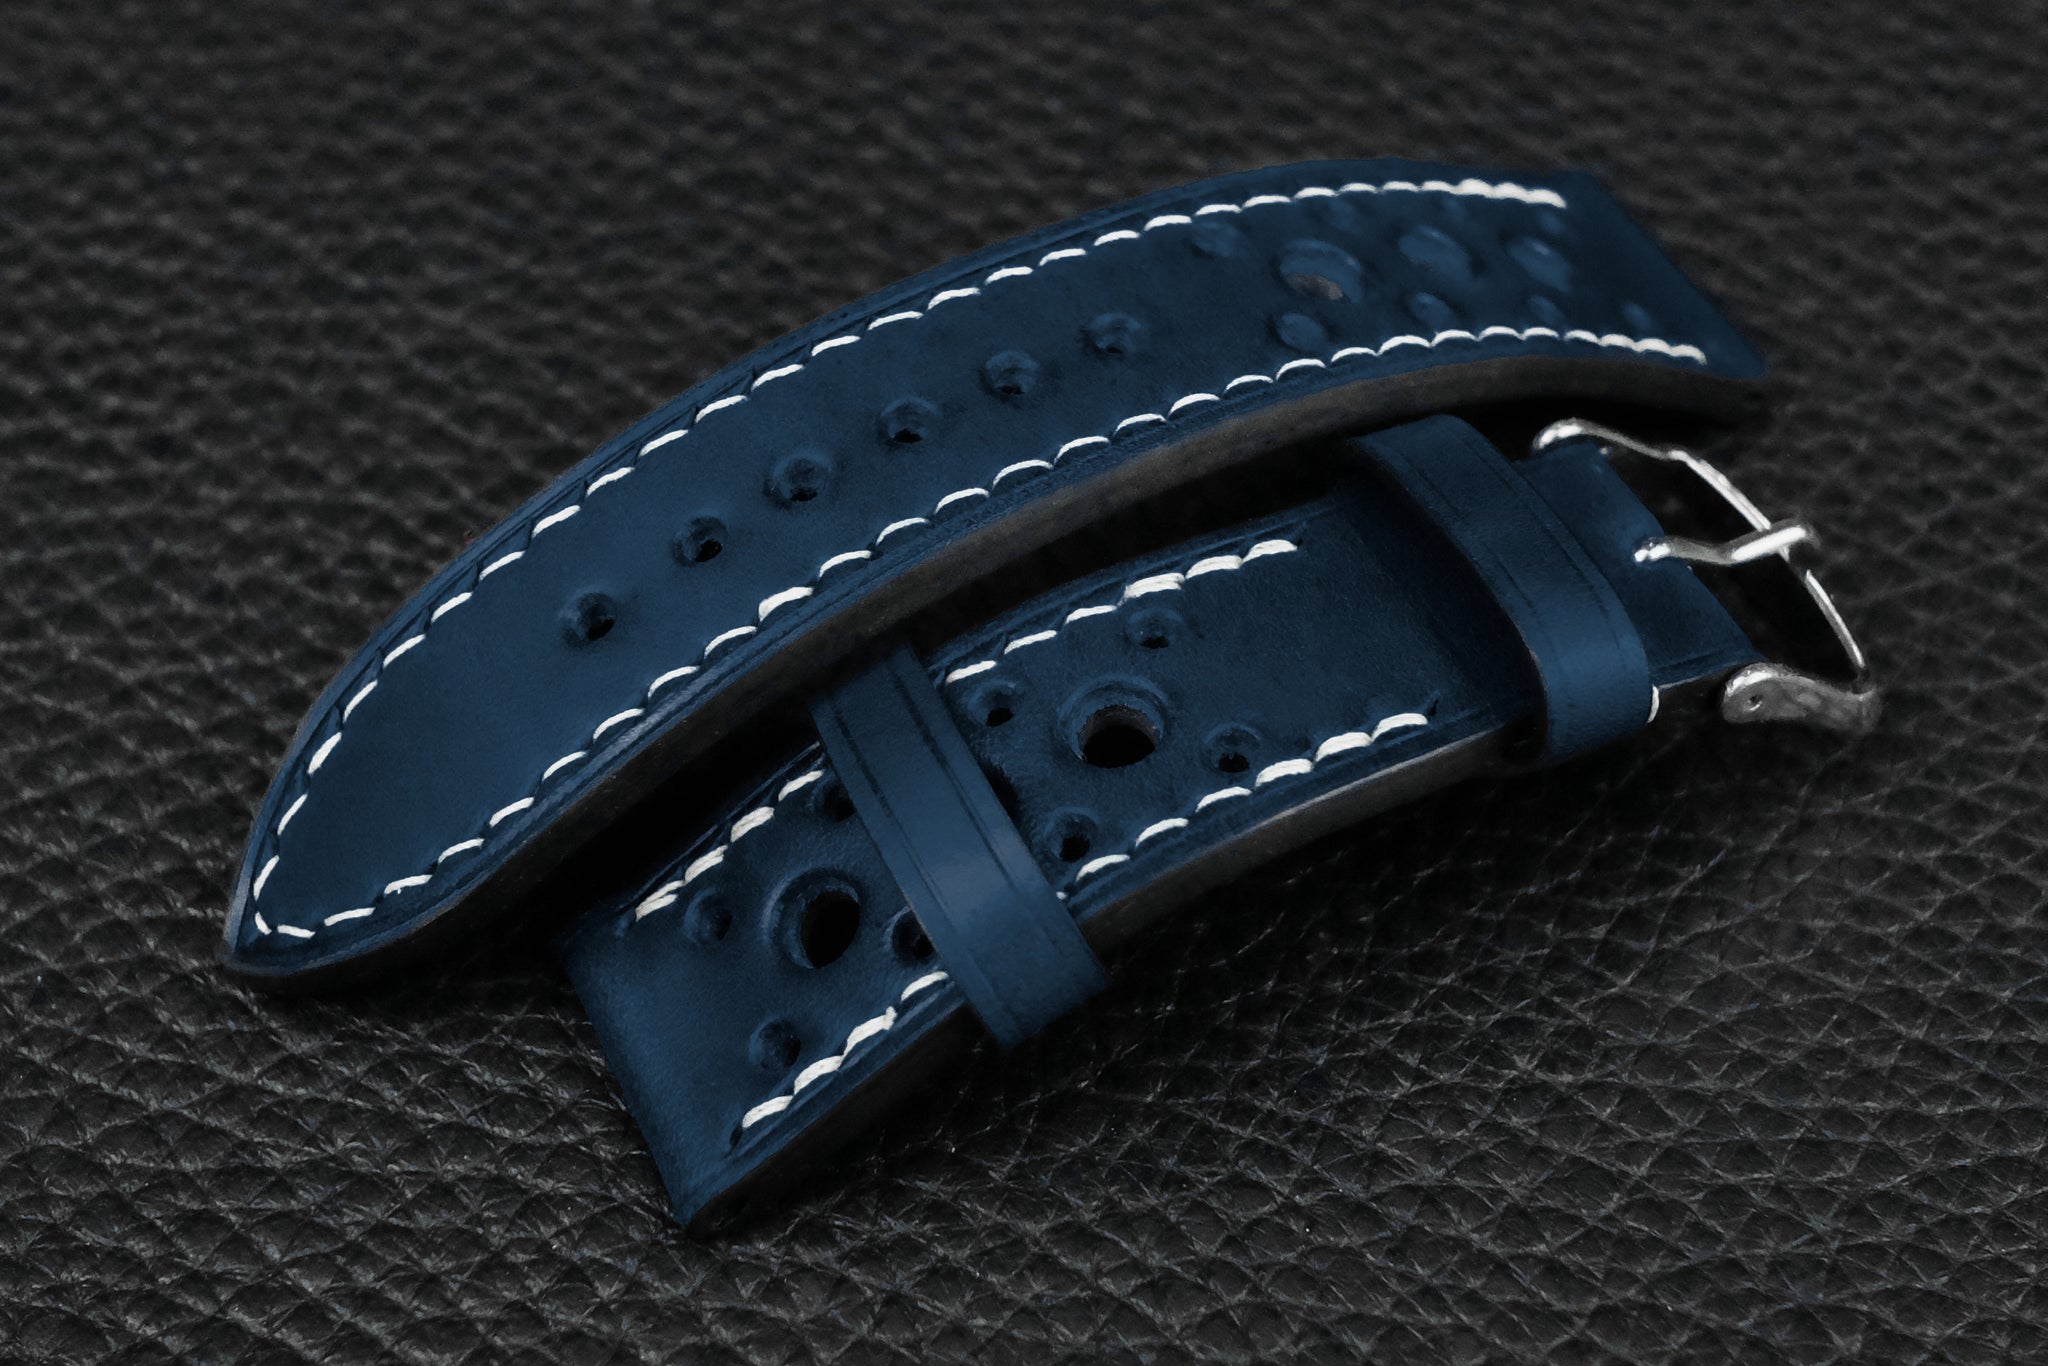 Curved end leather straps for your Omega Speedmaster Professional